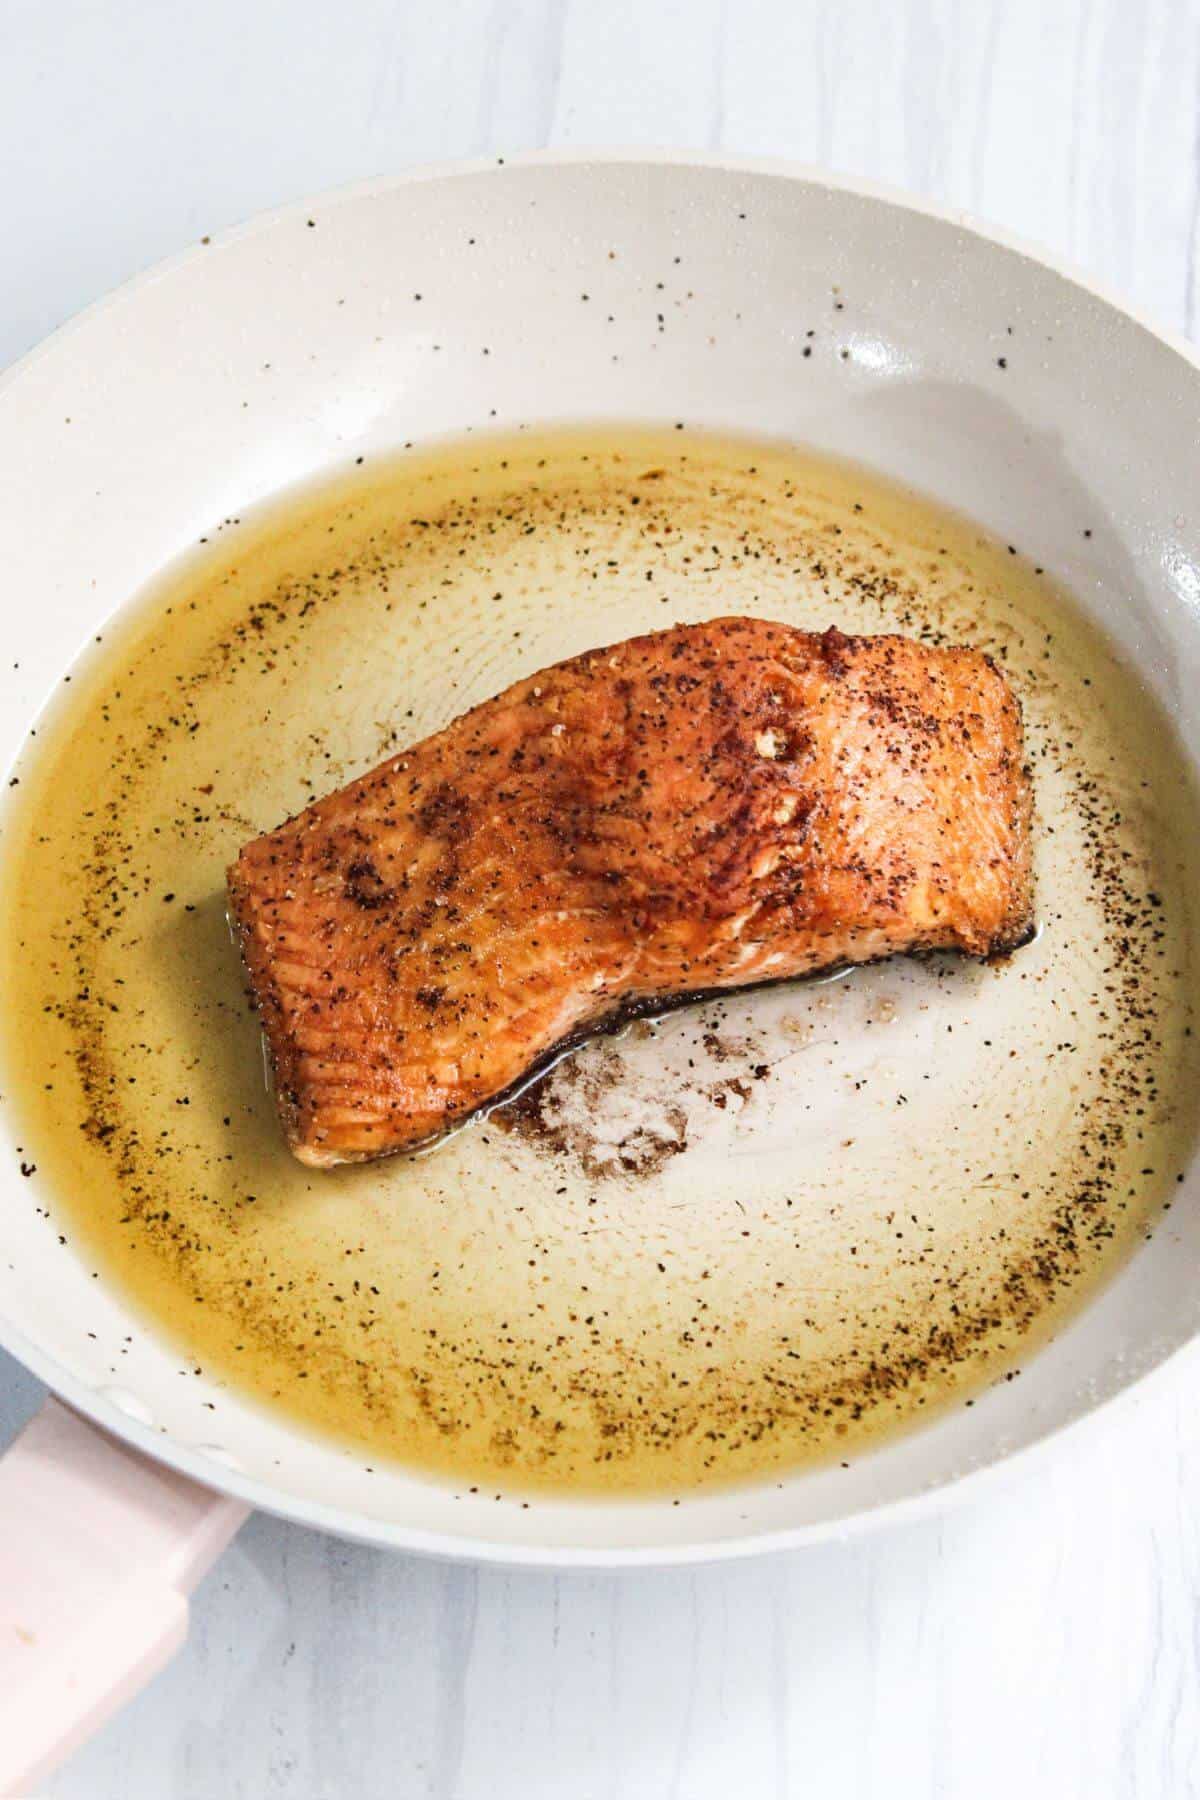 A salmon fillet in a frying pan.